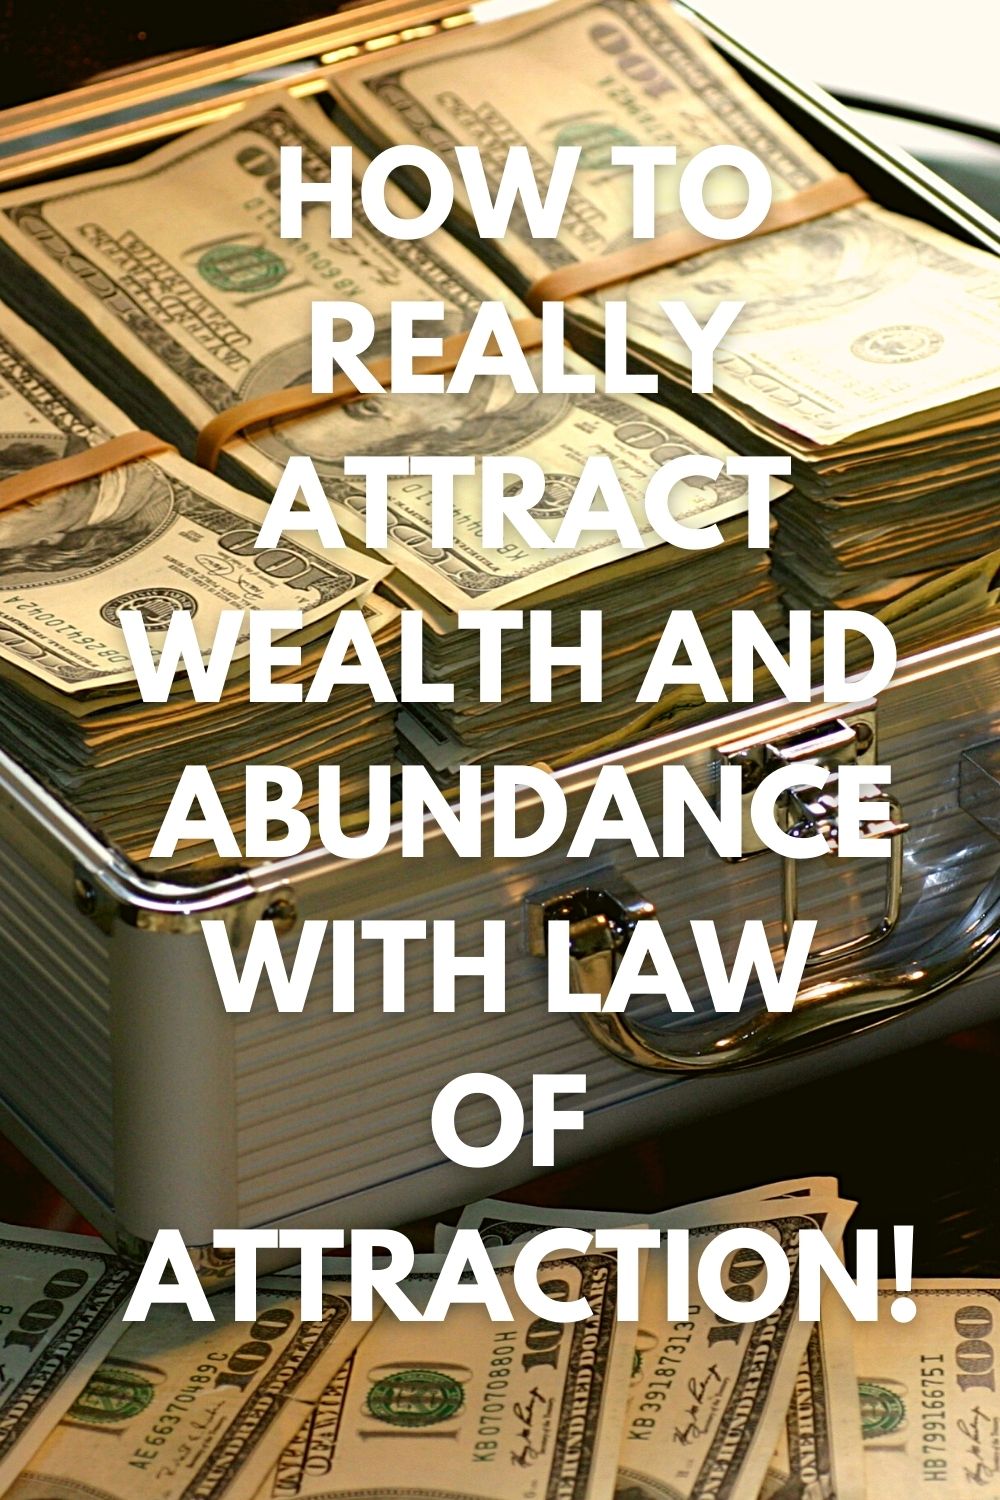 How to really attract wealth and abundance with law of attraction!